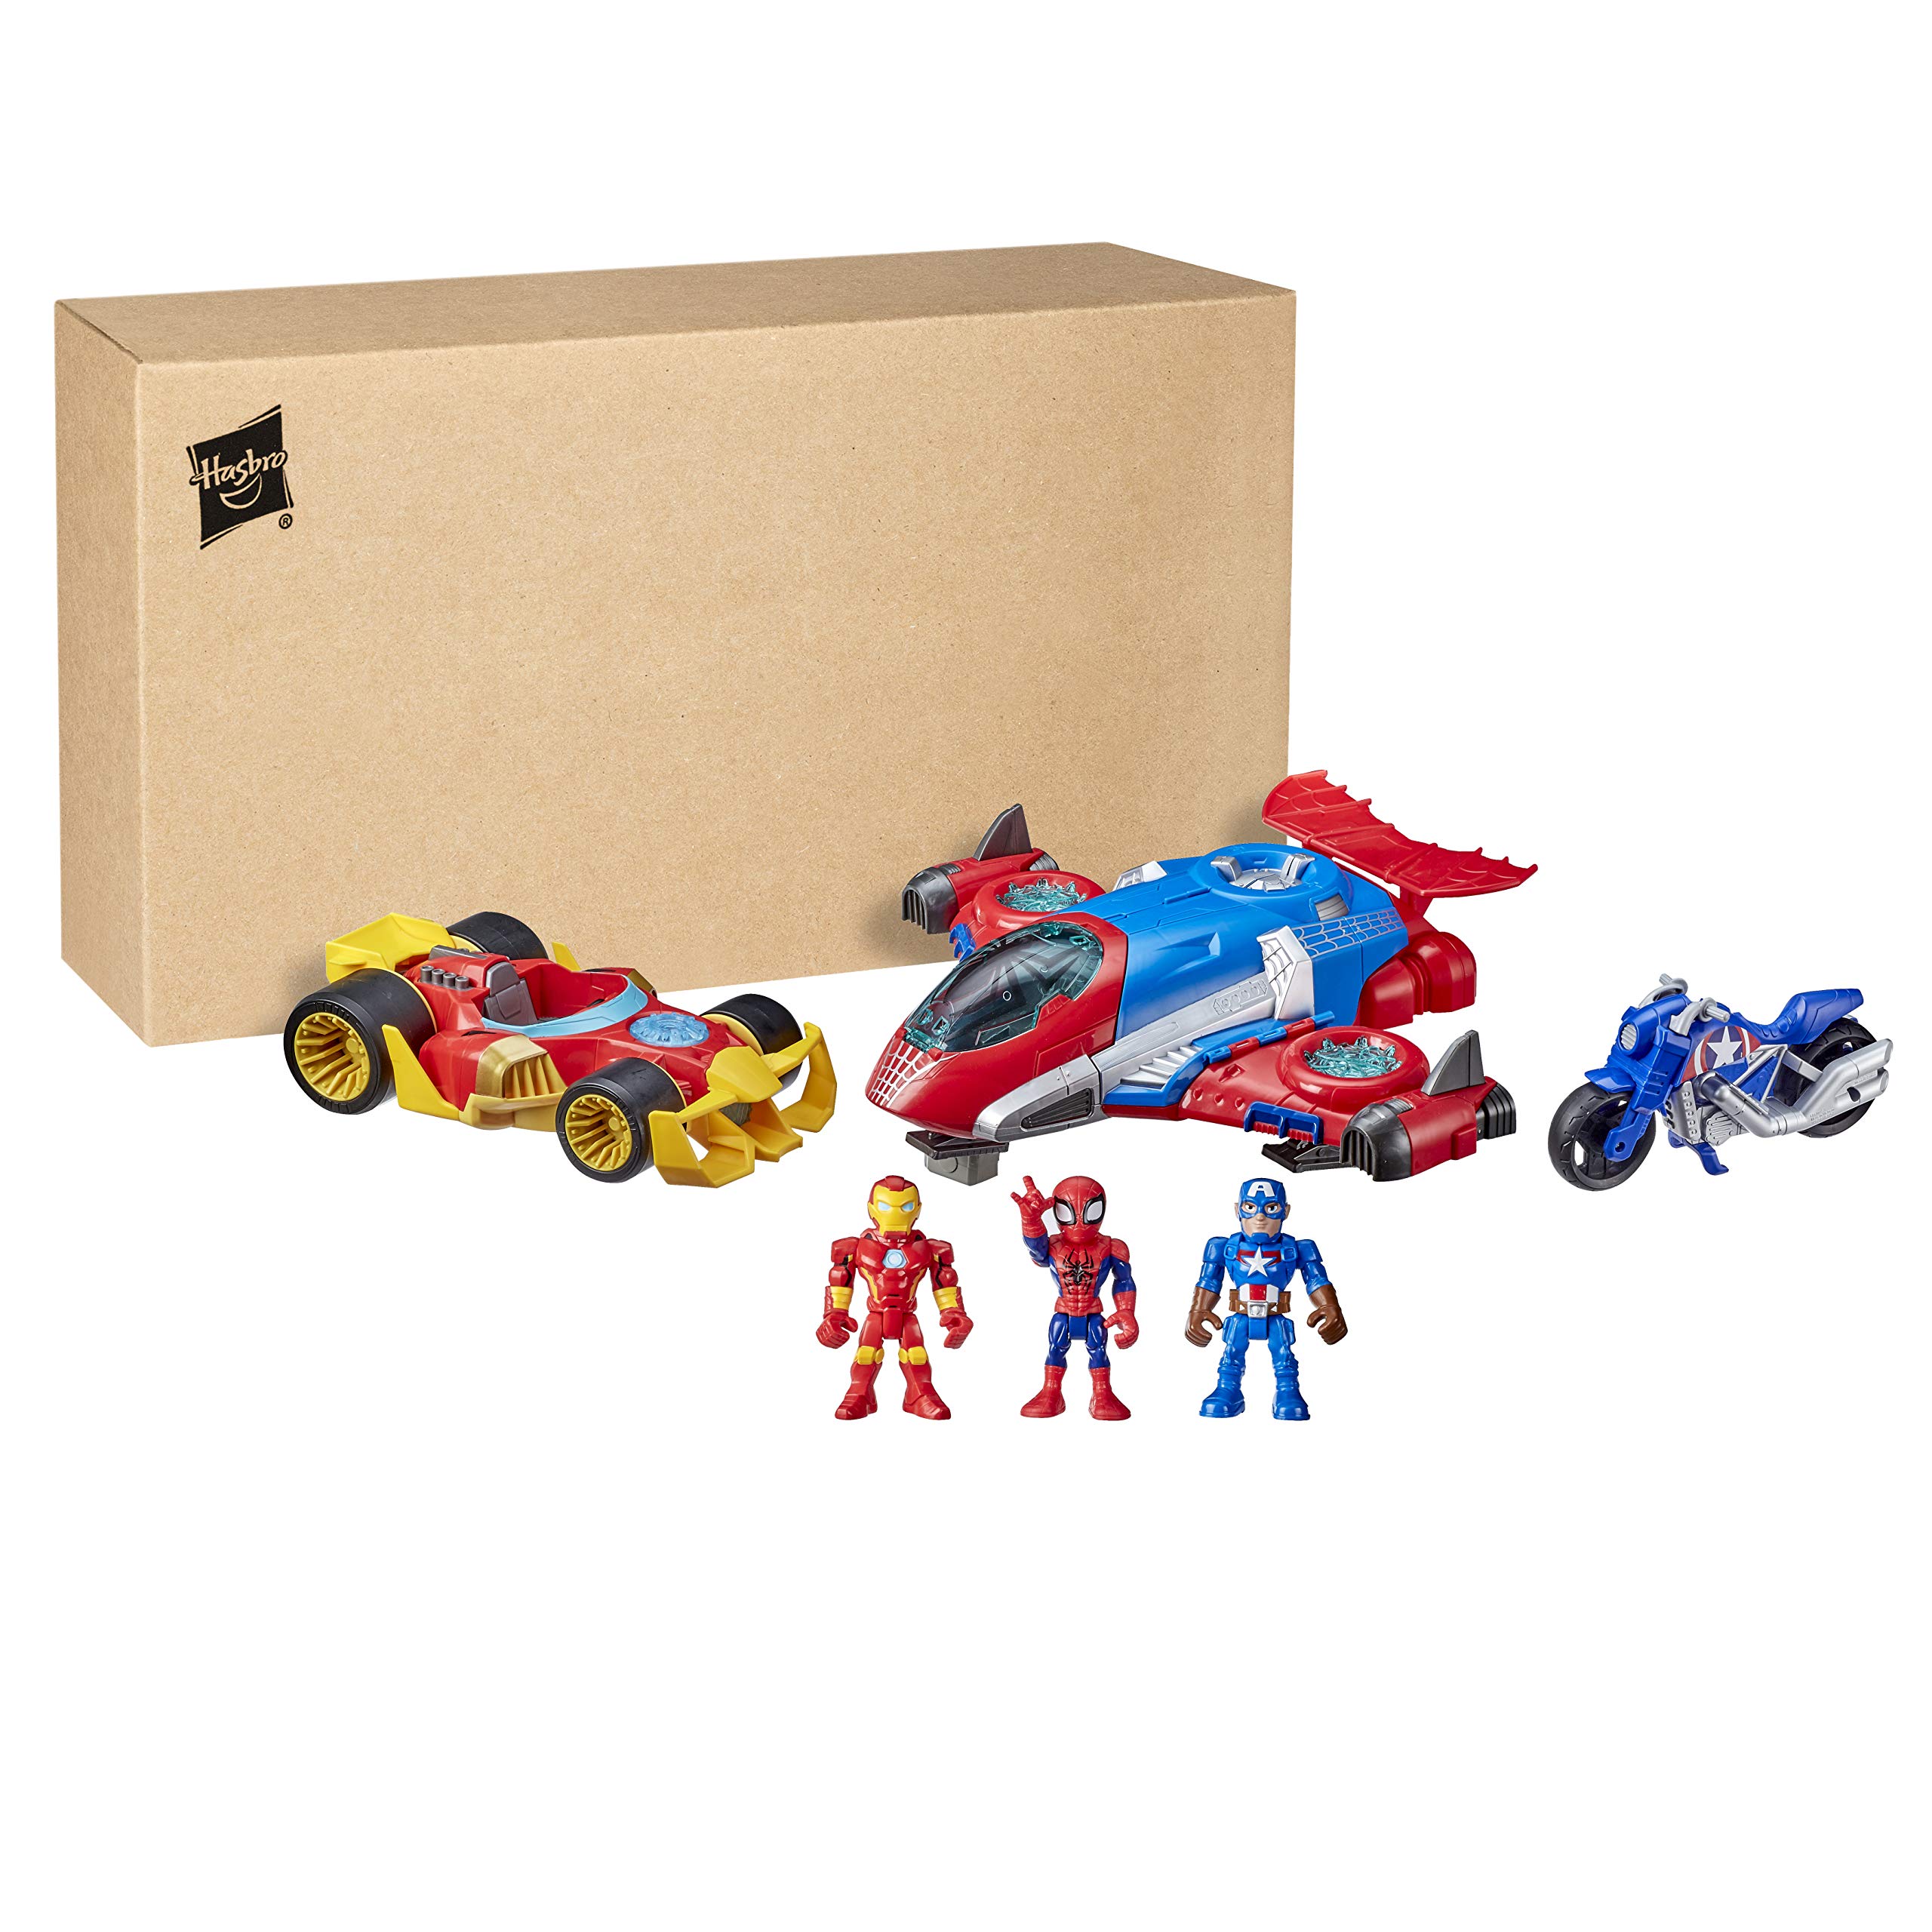 Marvel Super Hero Adventures Figure and Jetquarters Multipack, 3 Action Figures and 3 Vehicles, 5-Inch Toys for Kids Ages 3 and Up (Amazon Exclusive)